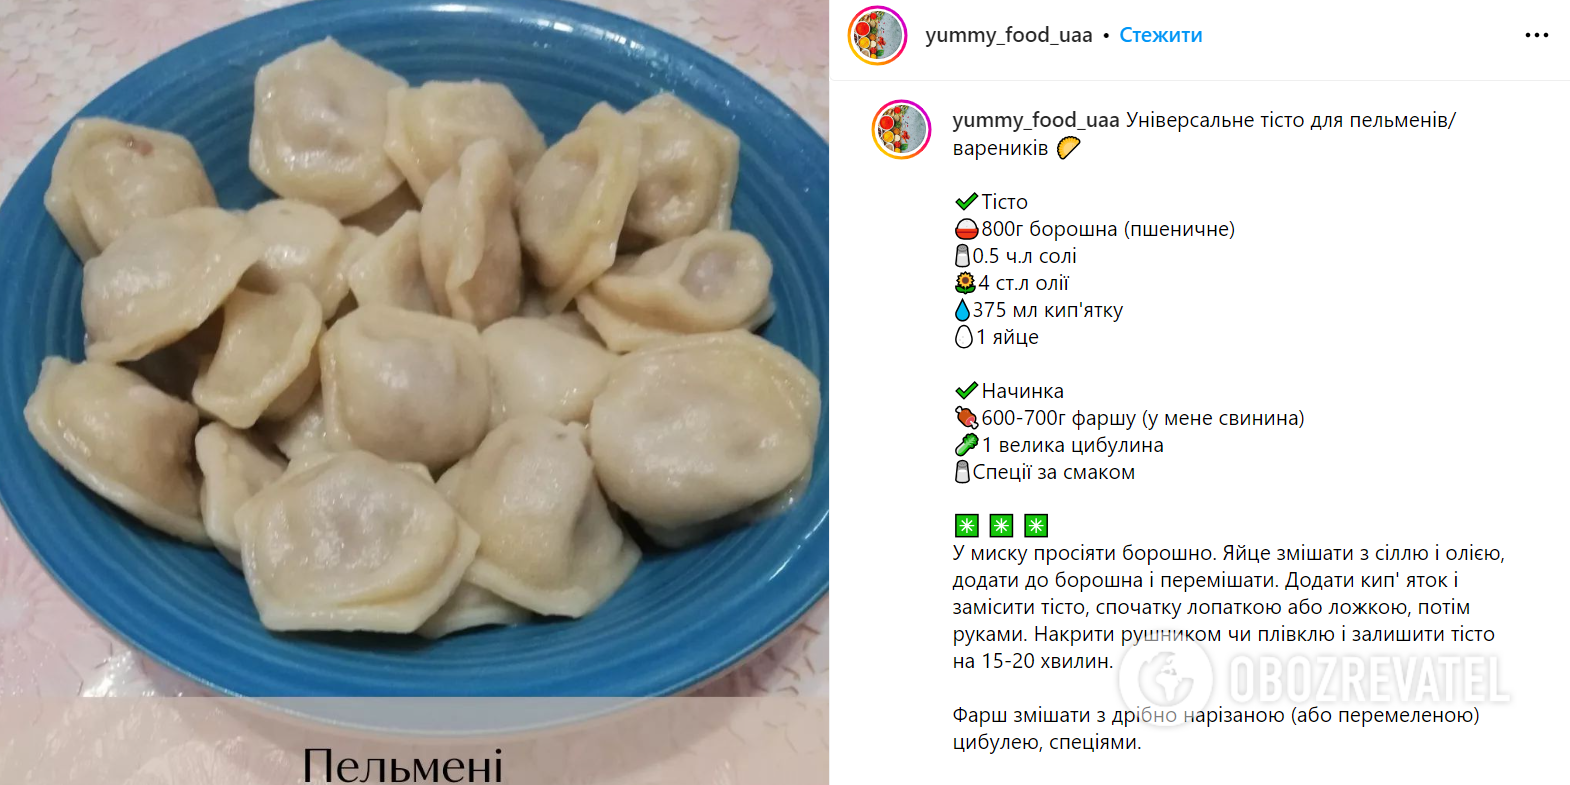 Simple dough for dumplings and varenyky: the dish will turn out perfect